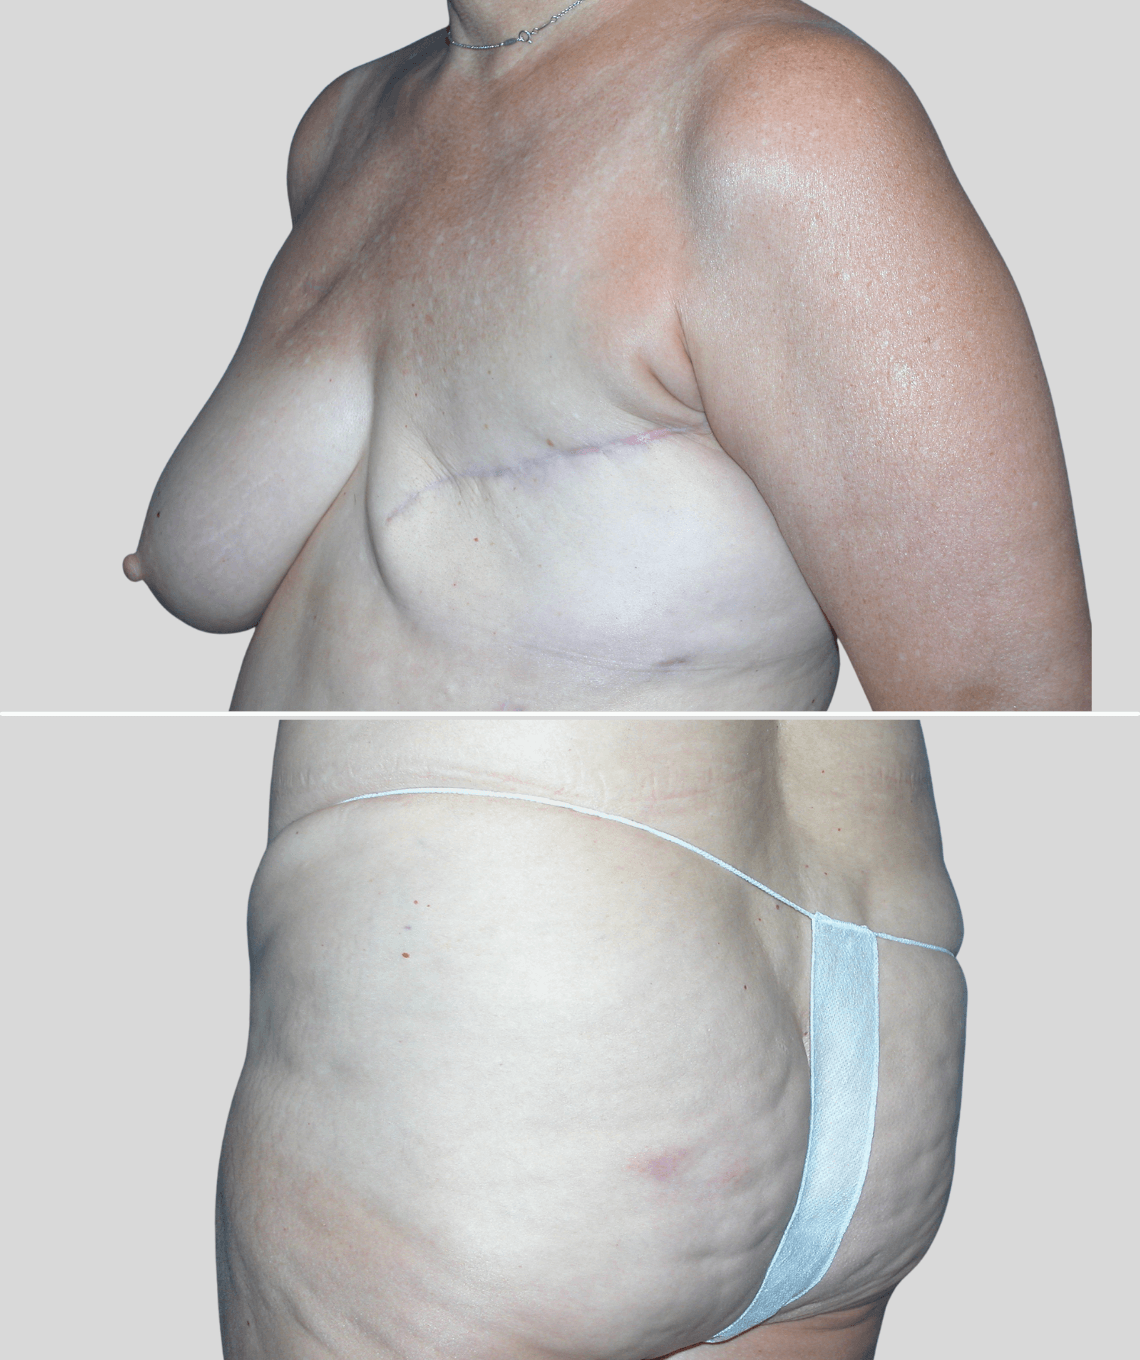 gap flap- before and after photos - before - prma plastic surgery - case 16